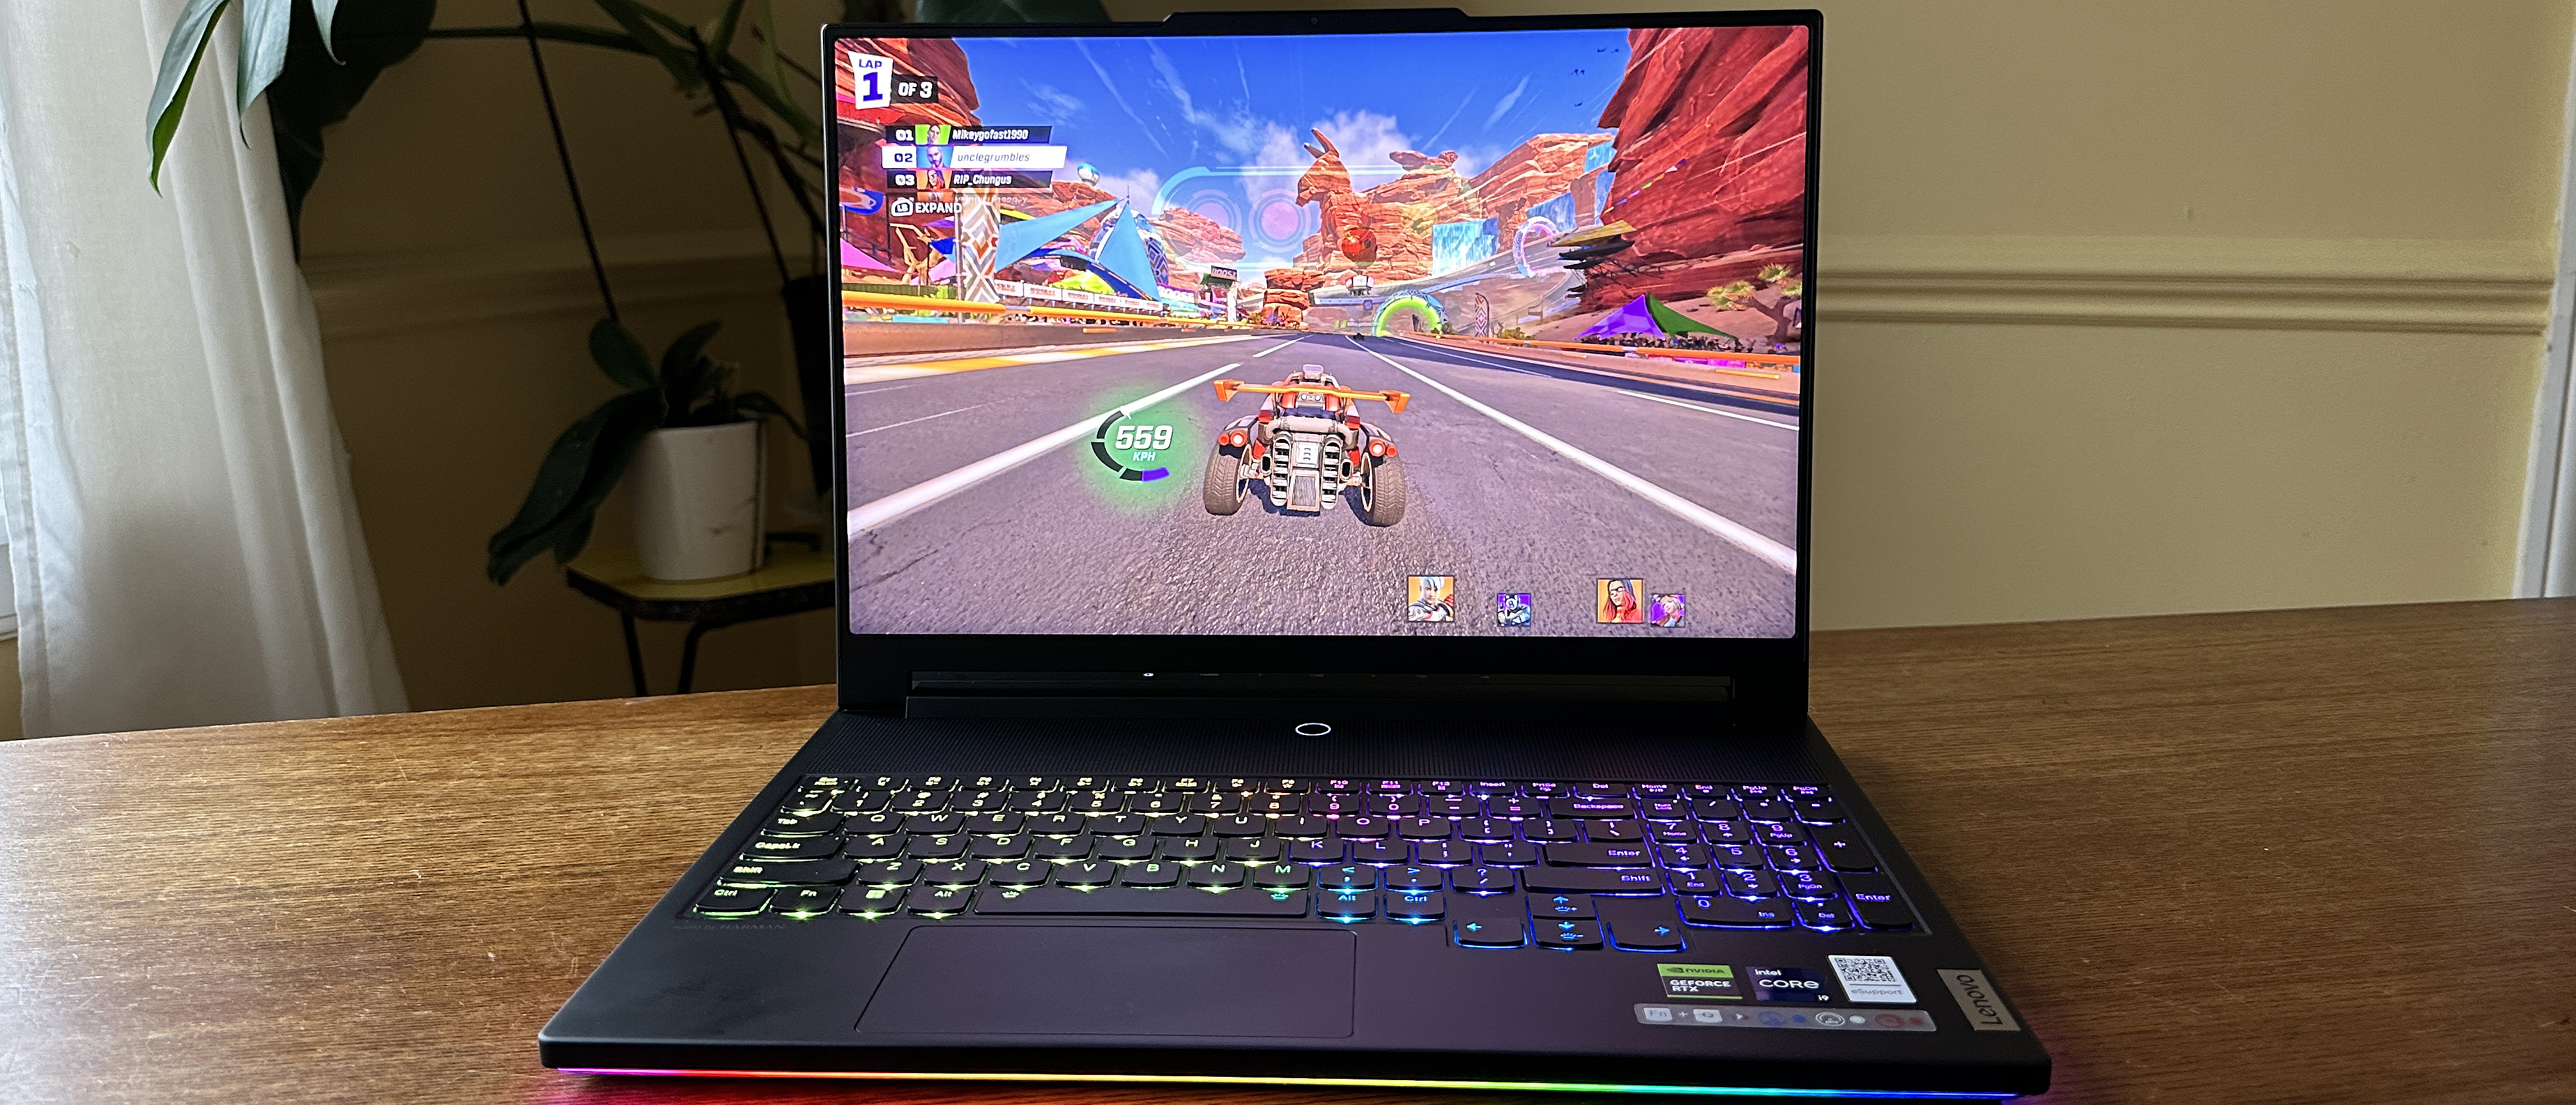 Lenovo Legion 9i First Gaming Laptop with Integrated Liquid-Cooling